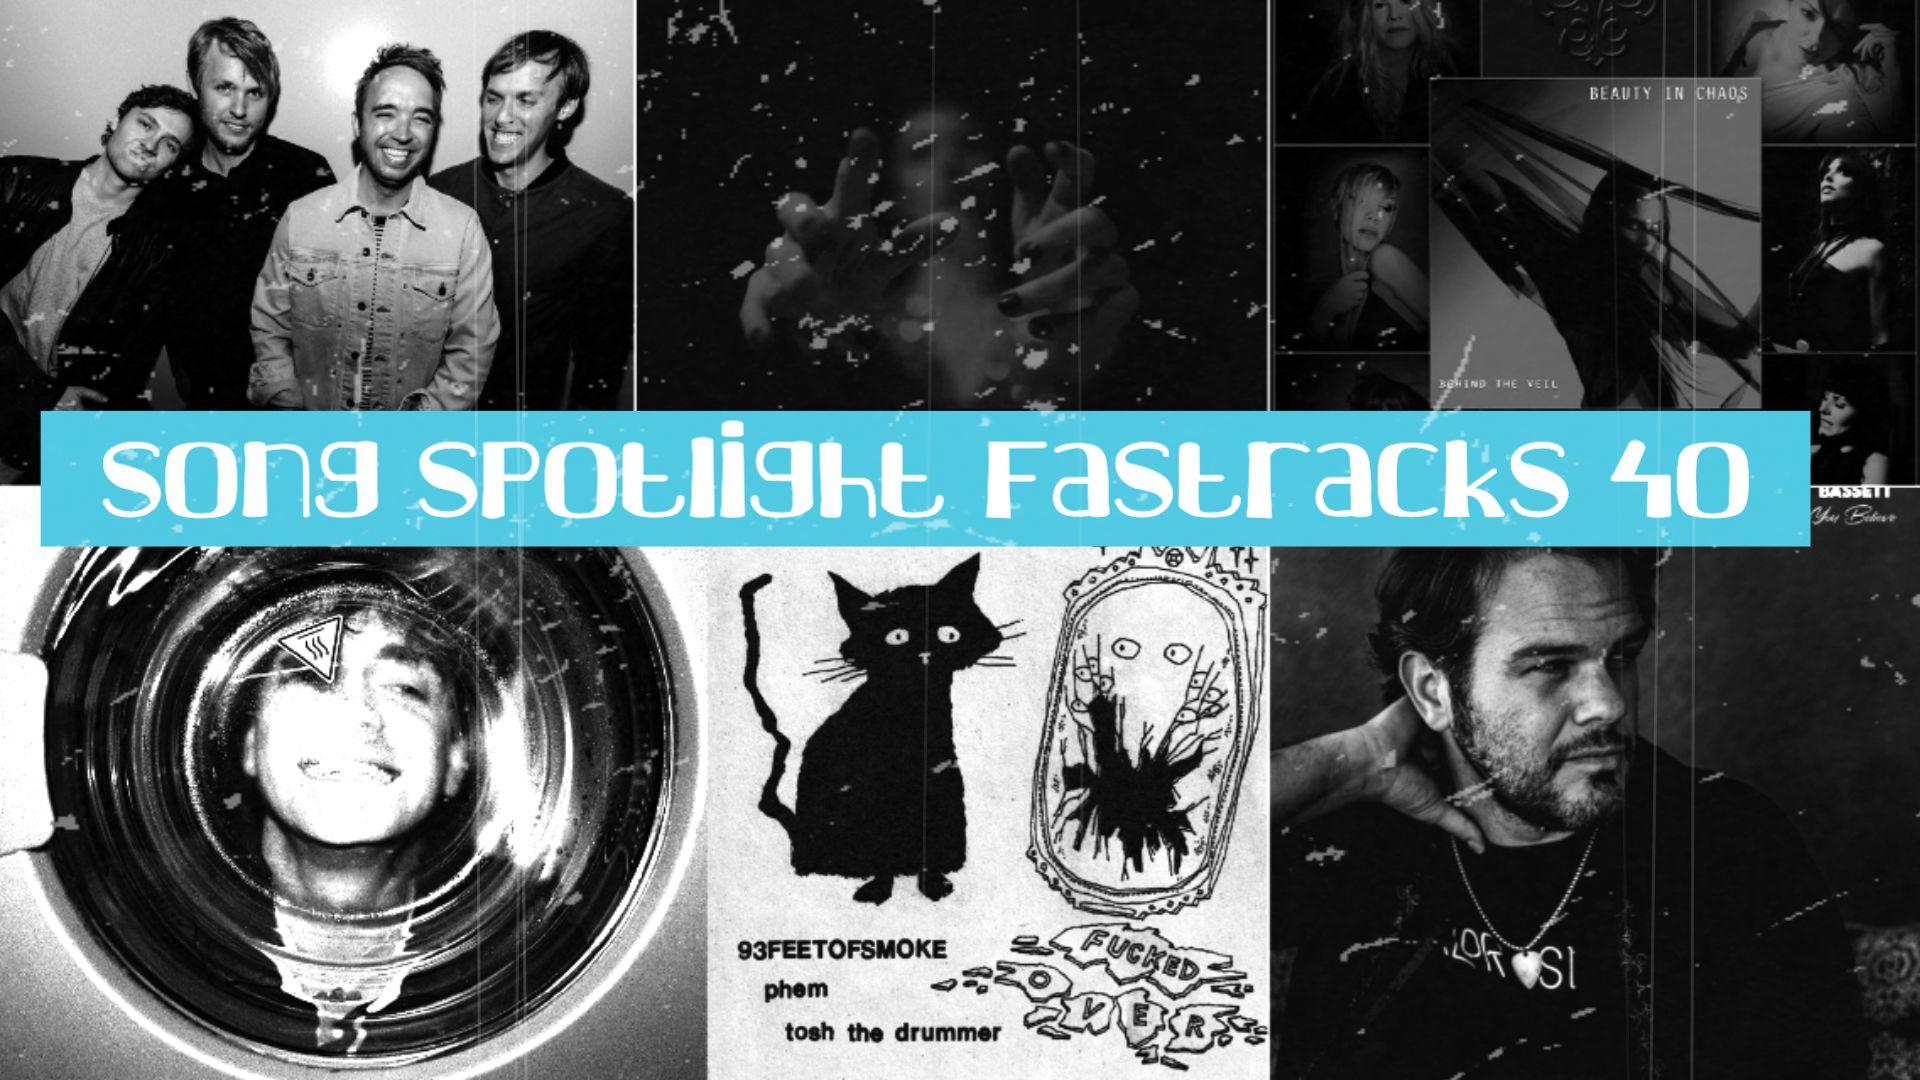 collage of 5 musicians headshots with text overlay that reads "song spotlight episode 40